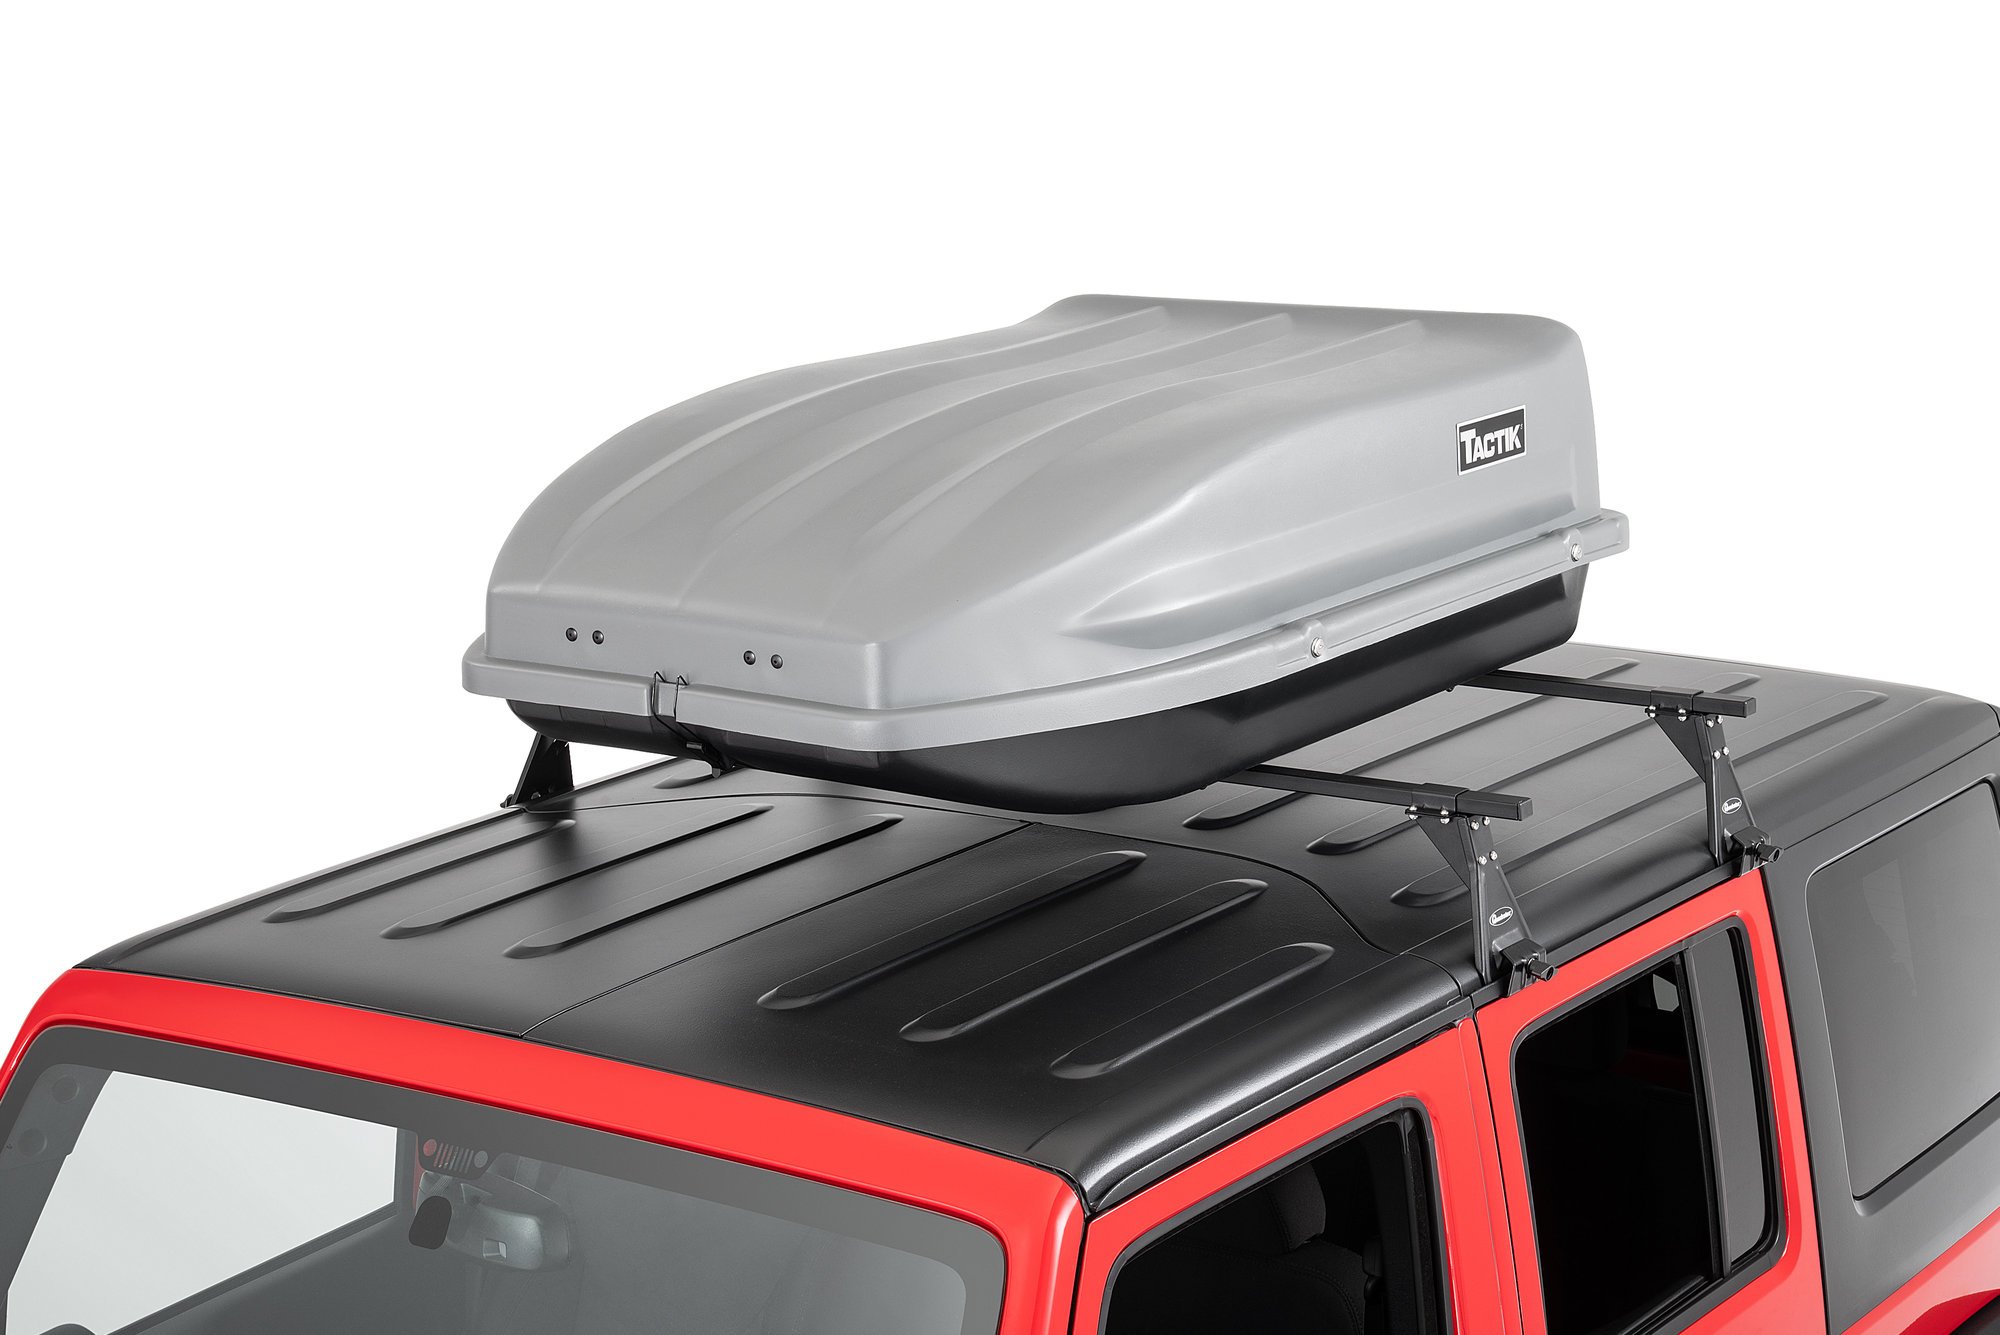 https://www.quadratec.com/sites/default/files/styles/product_zoomed/public/product_images/tactik-roof-top-cargo-carrier-18-cubic-feet-92020-1001-installed-main-cropped_0.jpg